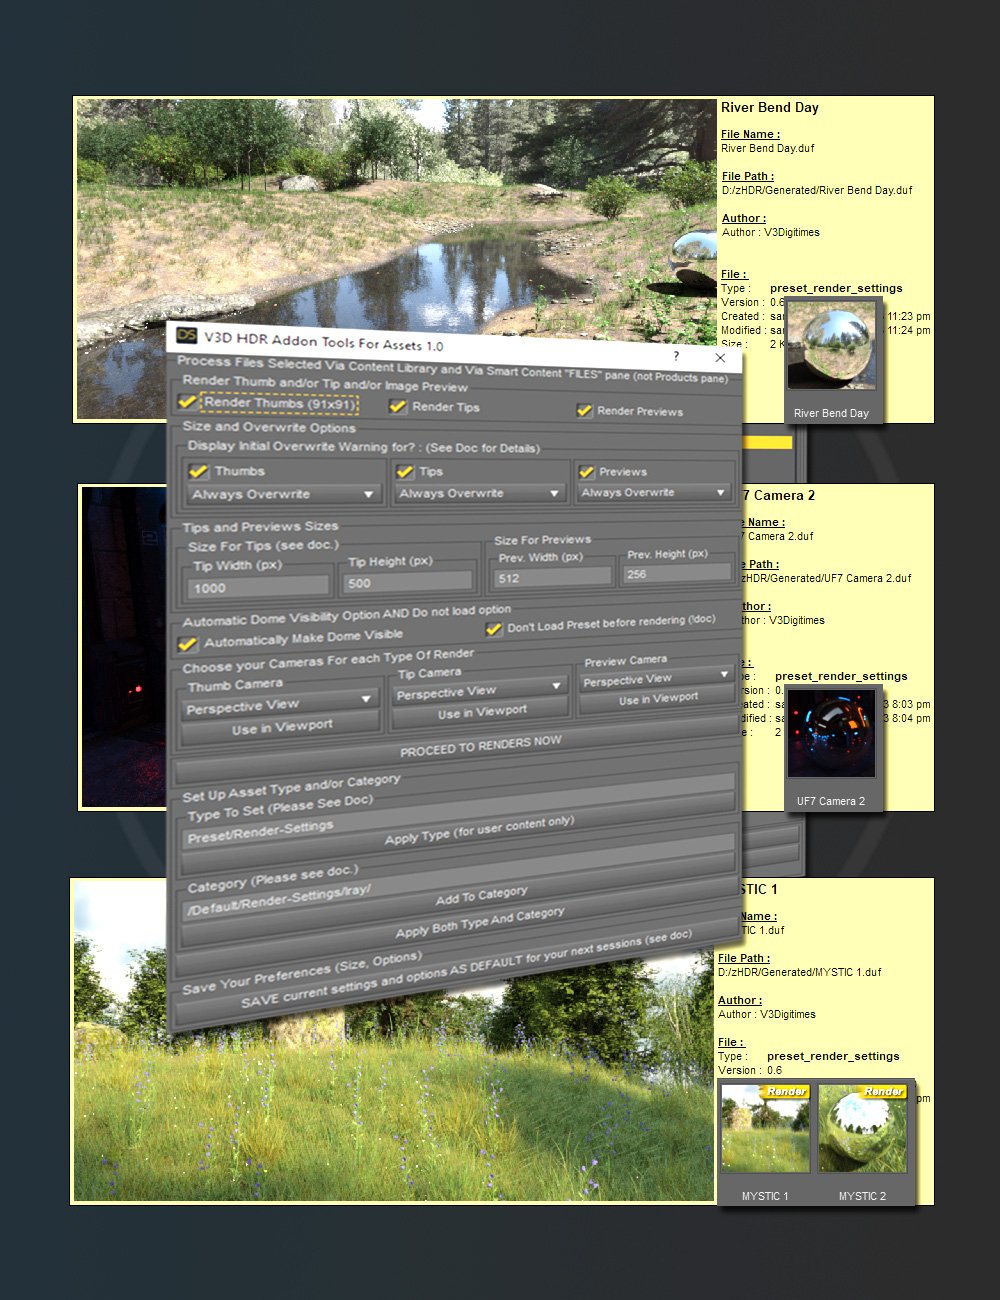 V3D HDR Add-On Tools